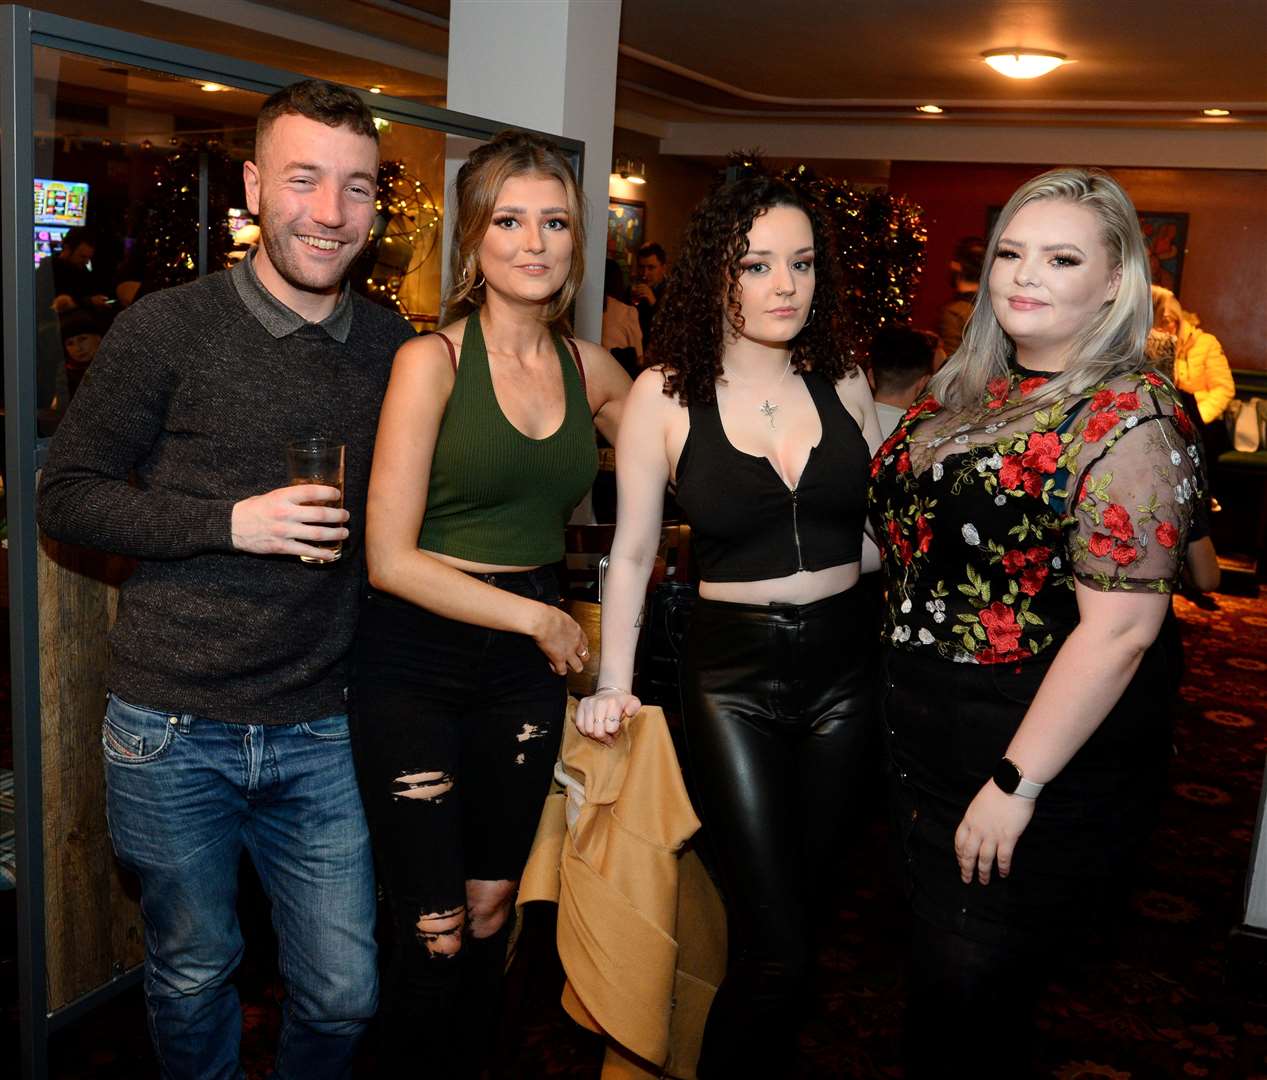 Martin Chisholm, Shannon O'Hara, Maegan Clay and Danielle Nicolson. Picture Gary Anthony.